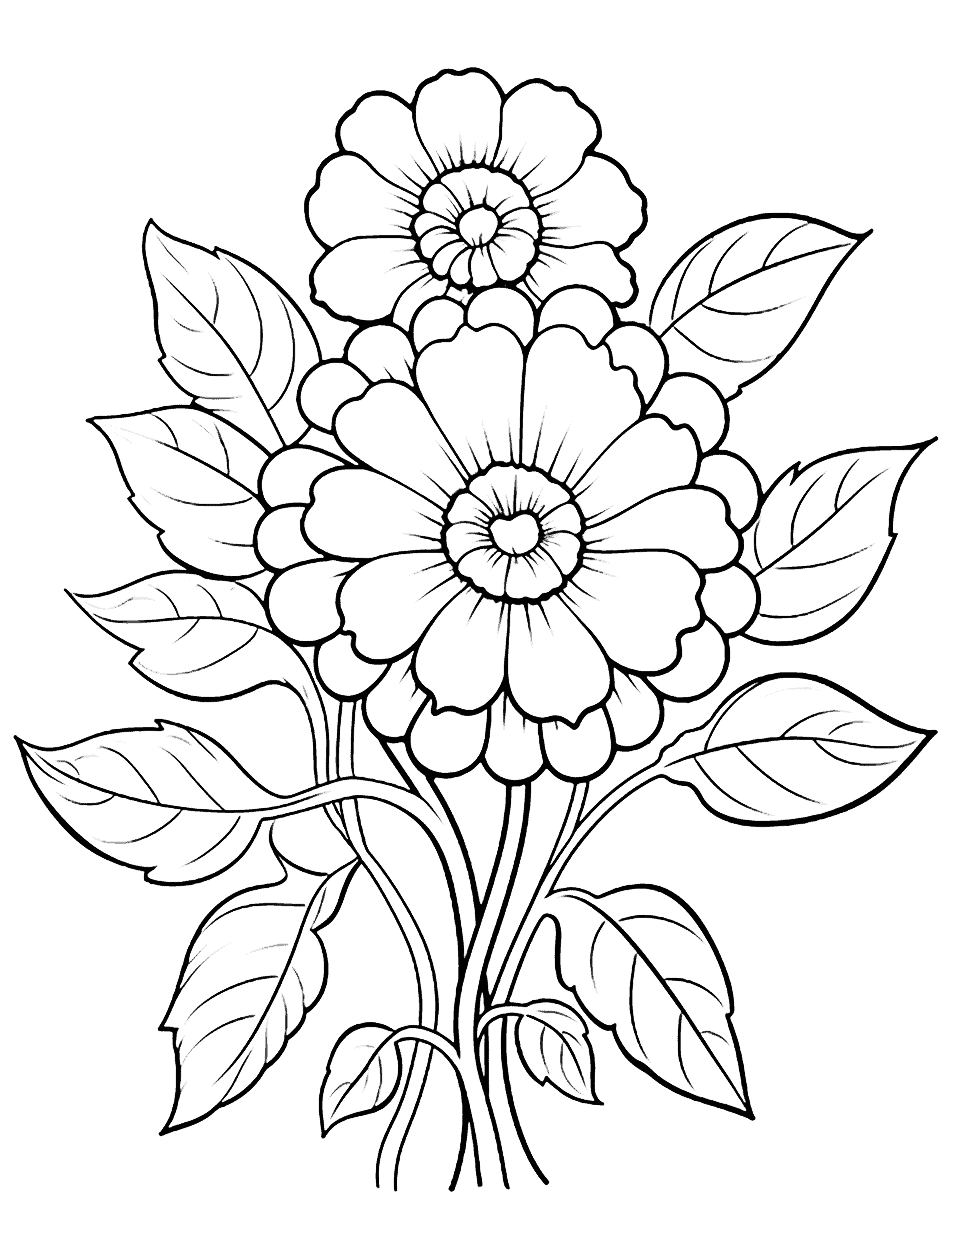 Advanced Springtime Flowers Flower Coloring Page - A realistic and detailed springtime flower scene.